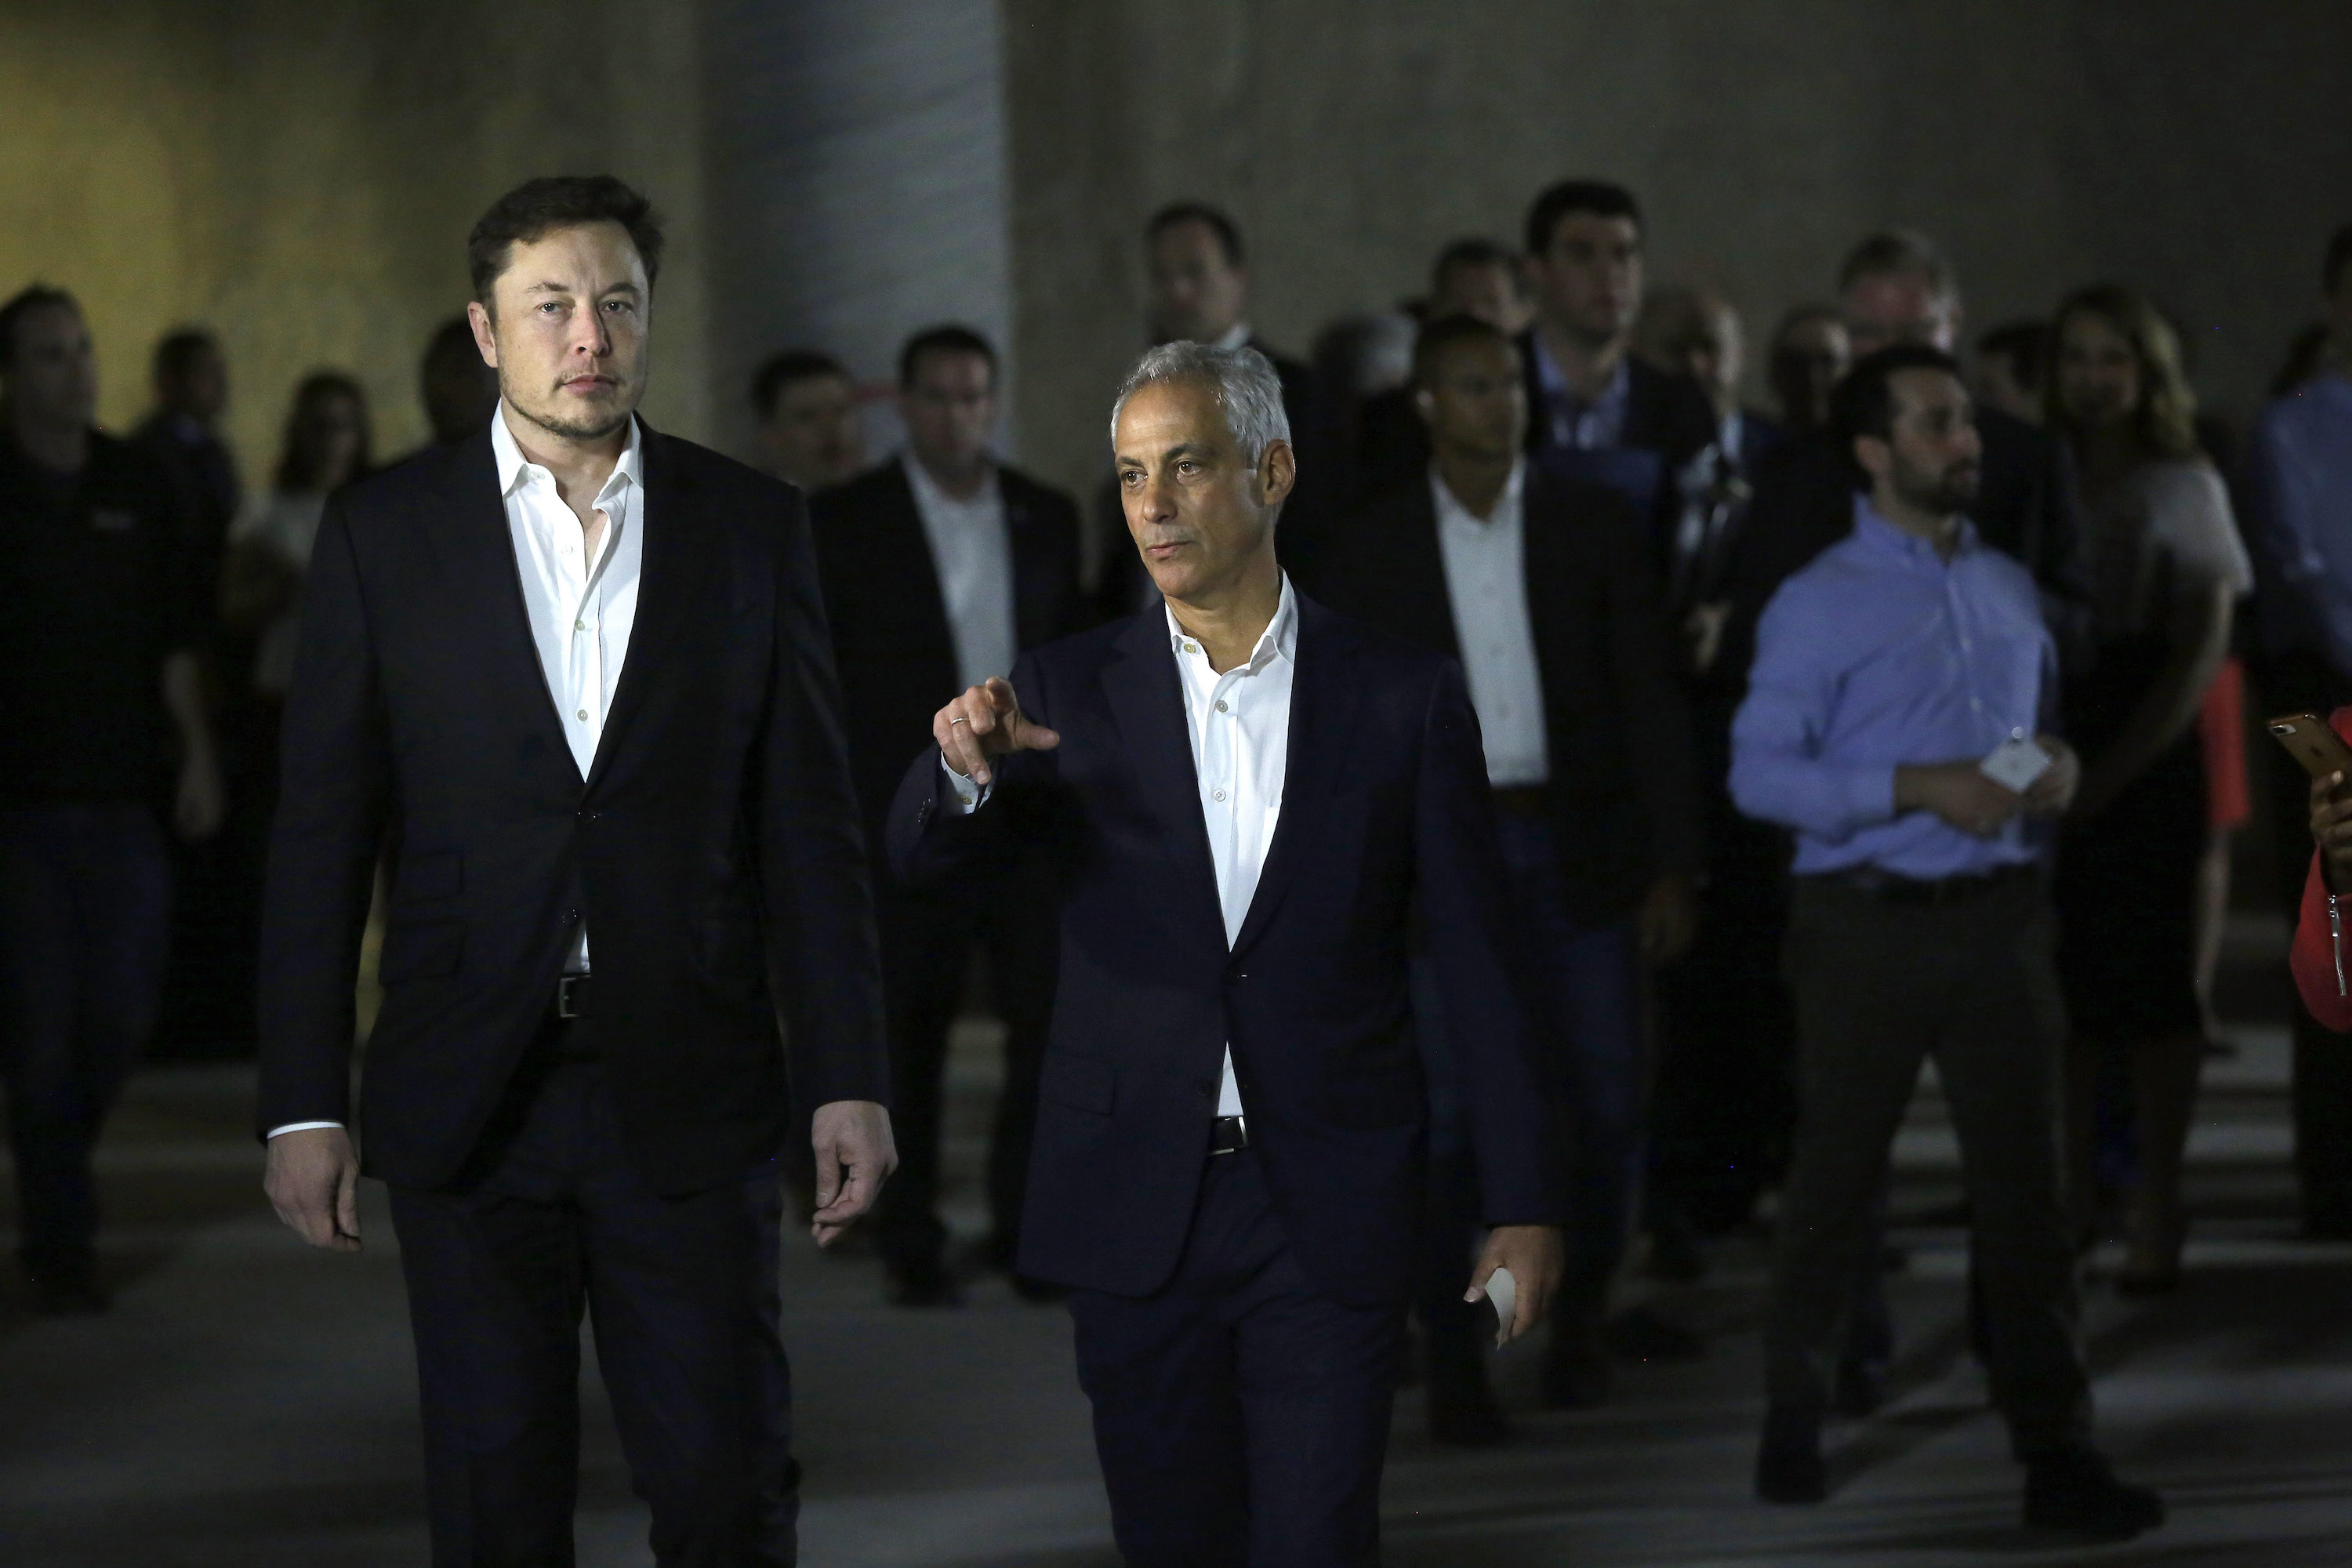 Chicago Mayor Rahm Emanuel talks about constructing a high speed transit tunnel with engineer and tech entrepreneur Elon Musk of The Boring Company at Block 37 on June 14, 2018 in Chicago, Illinois. Musk said he could create a 16-passenger vehicle to operate on a high-speed rail system that could get travelers to and from downtown Chicago and O'hare International Airport under twenty minutes, at speeds of over 100 miles per hour. (Photo by Joshua Lott/Getty Images)